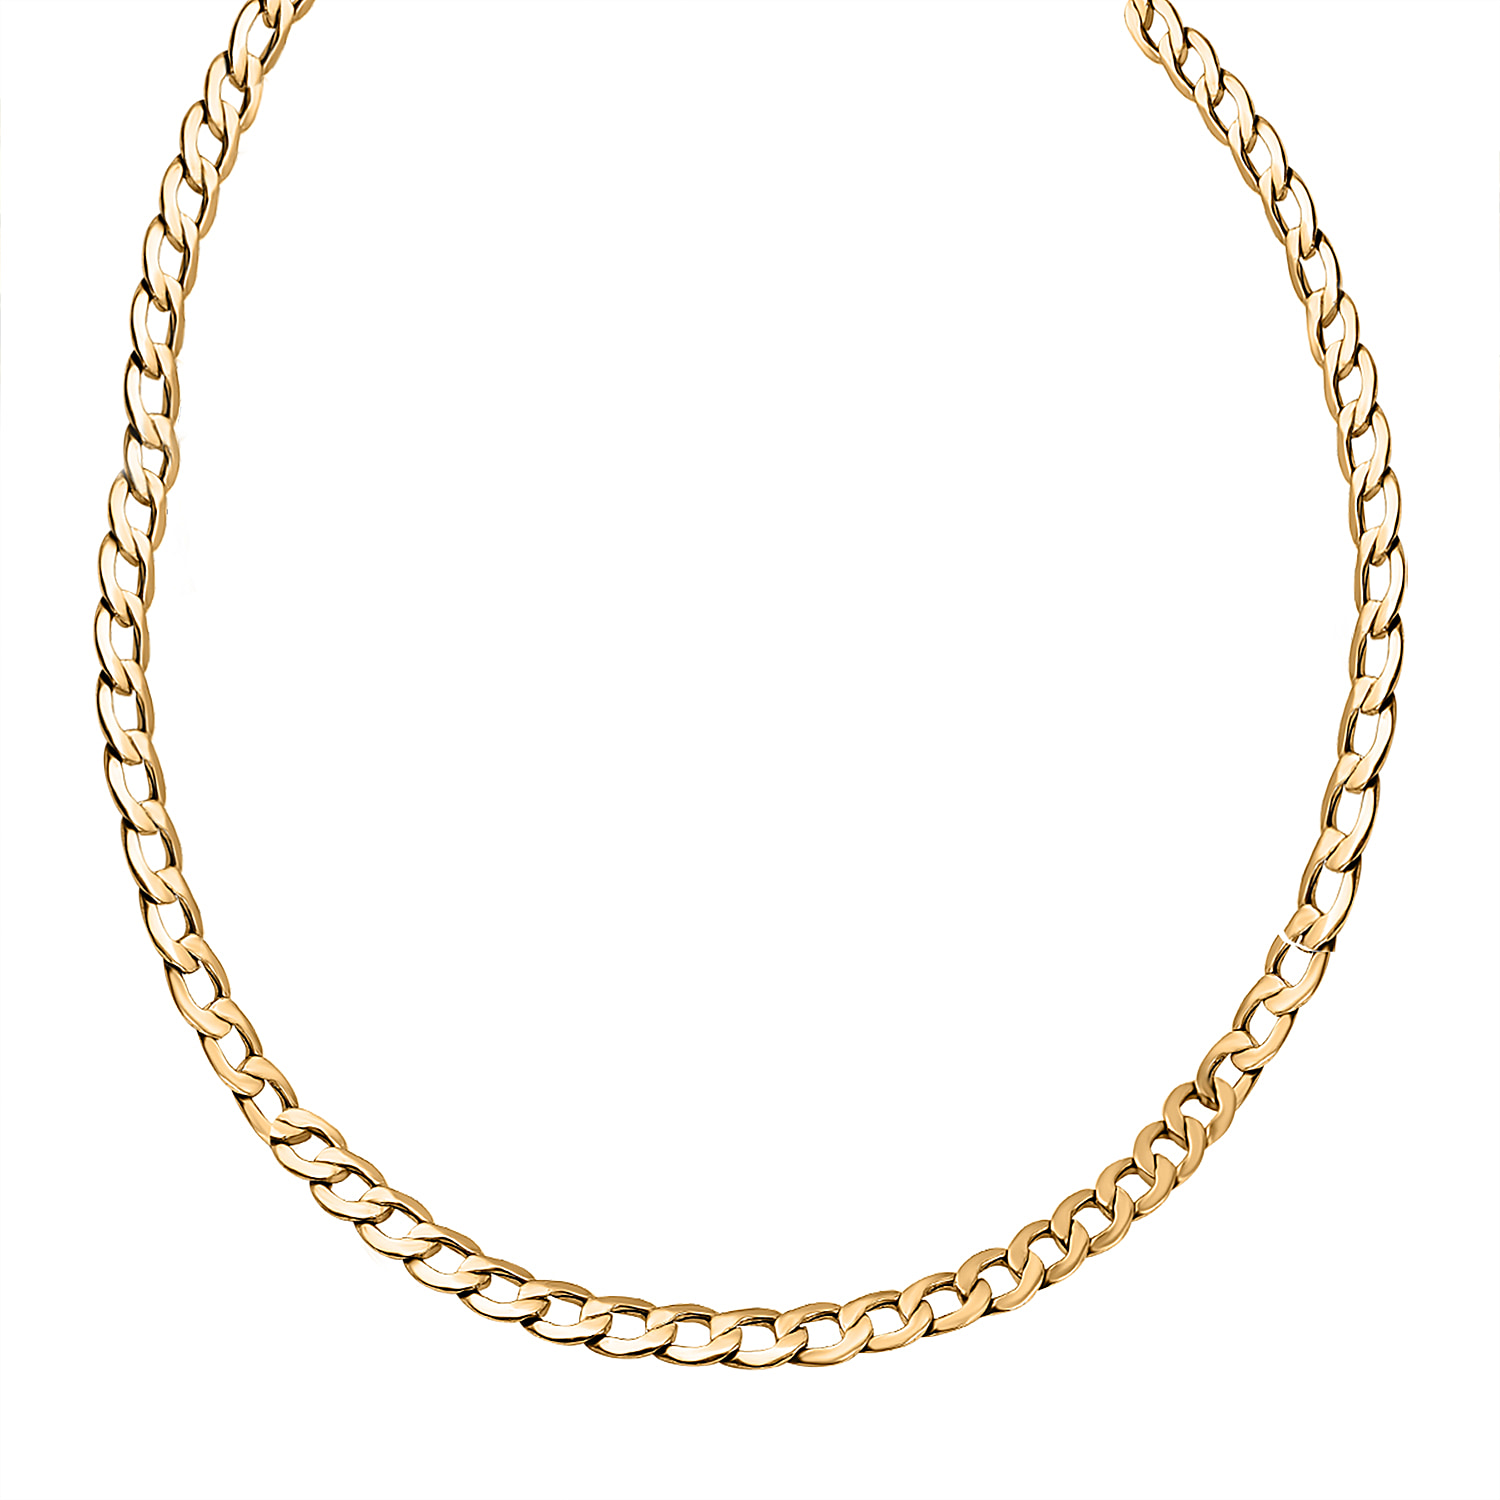 Italian Made Close Out - 9K Yellow Gold Curb Necklace (Size - 20), Gold Wt. 6.70 Gms